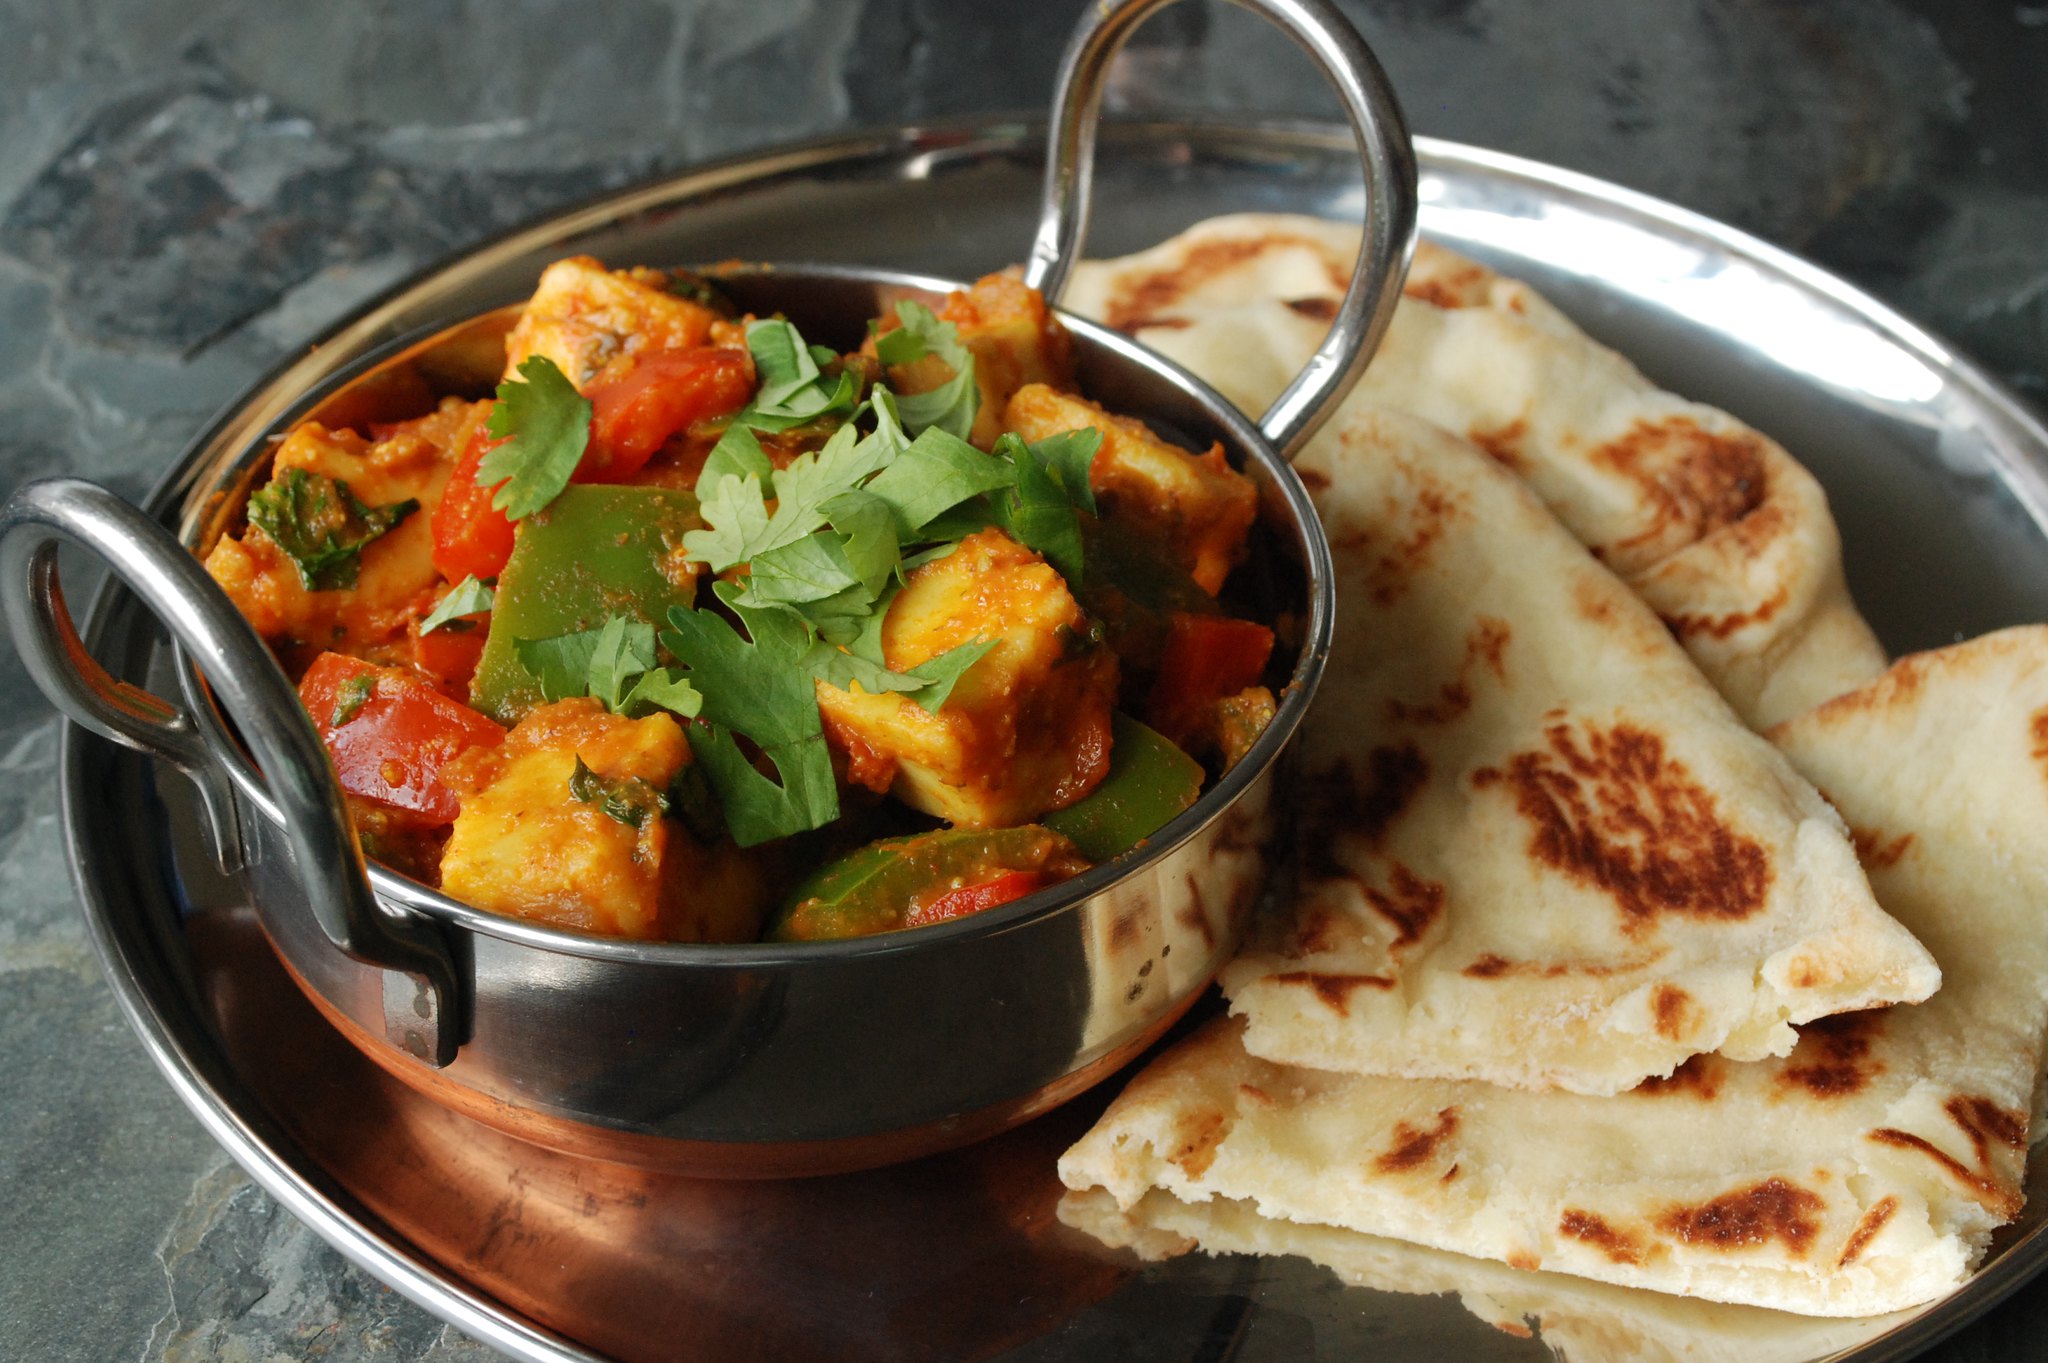 A side angle photo of Indian paneer dish in a metal tray on a stone table.